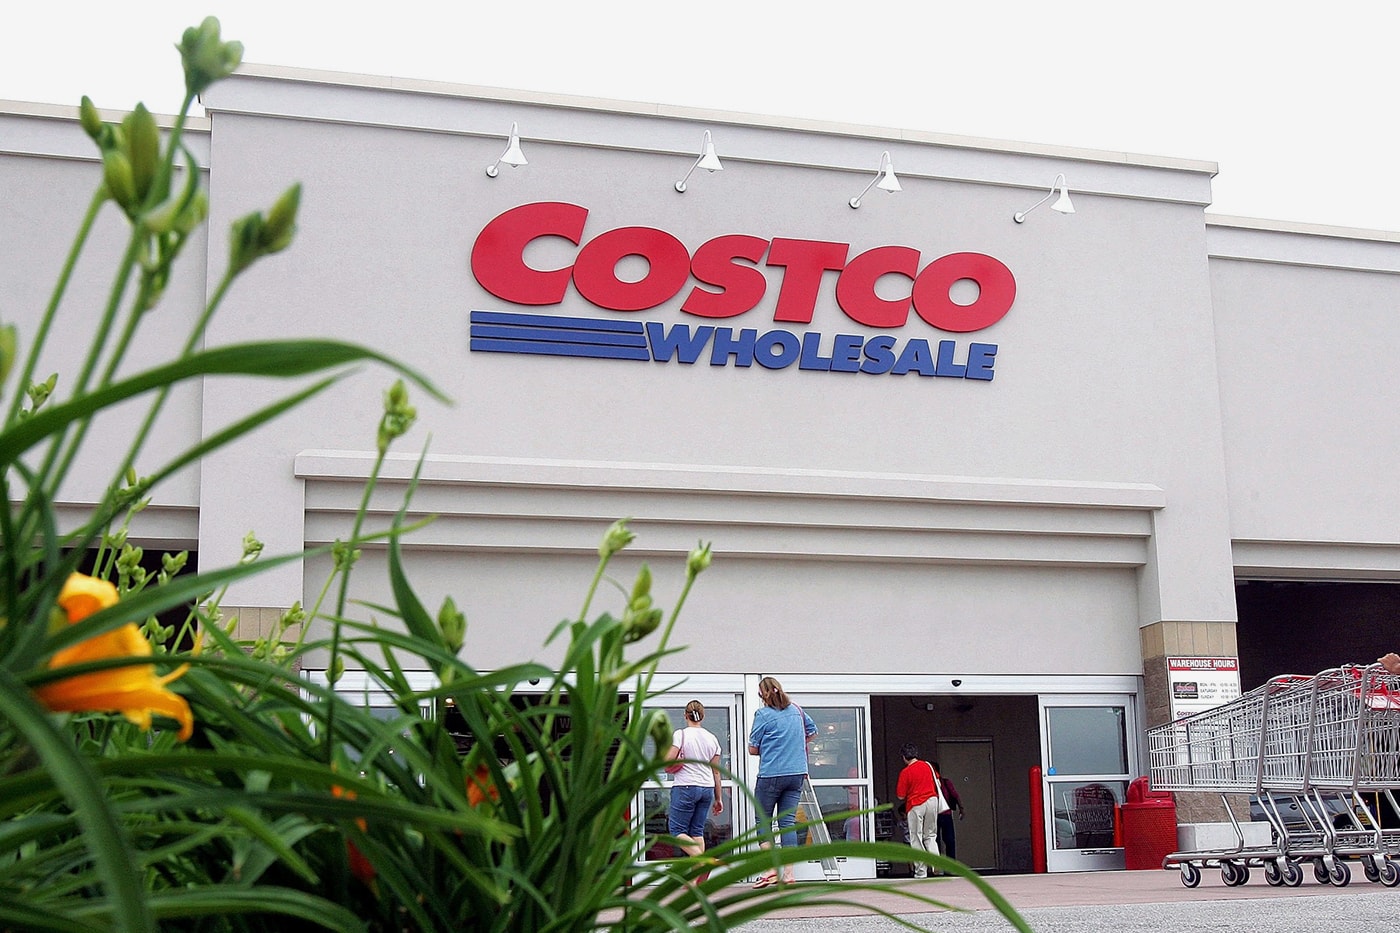 Costco $1.50 USD 1985 Hot Dog and Soda Info foods food court cost plus loss leader strategy business